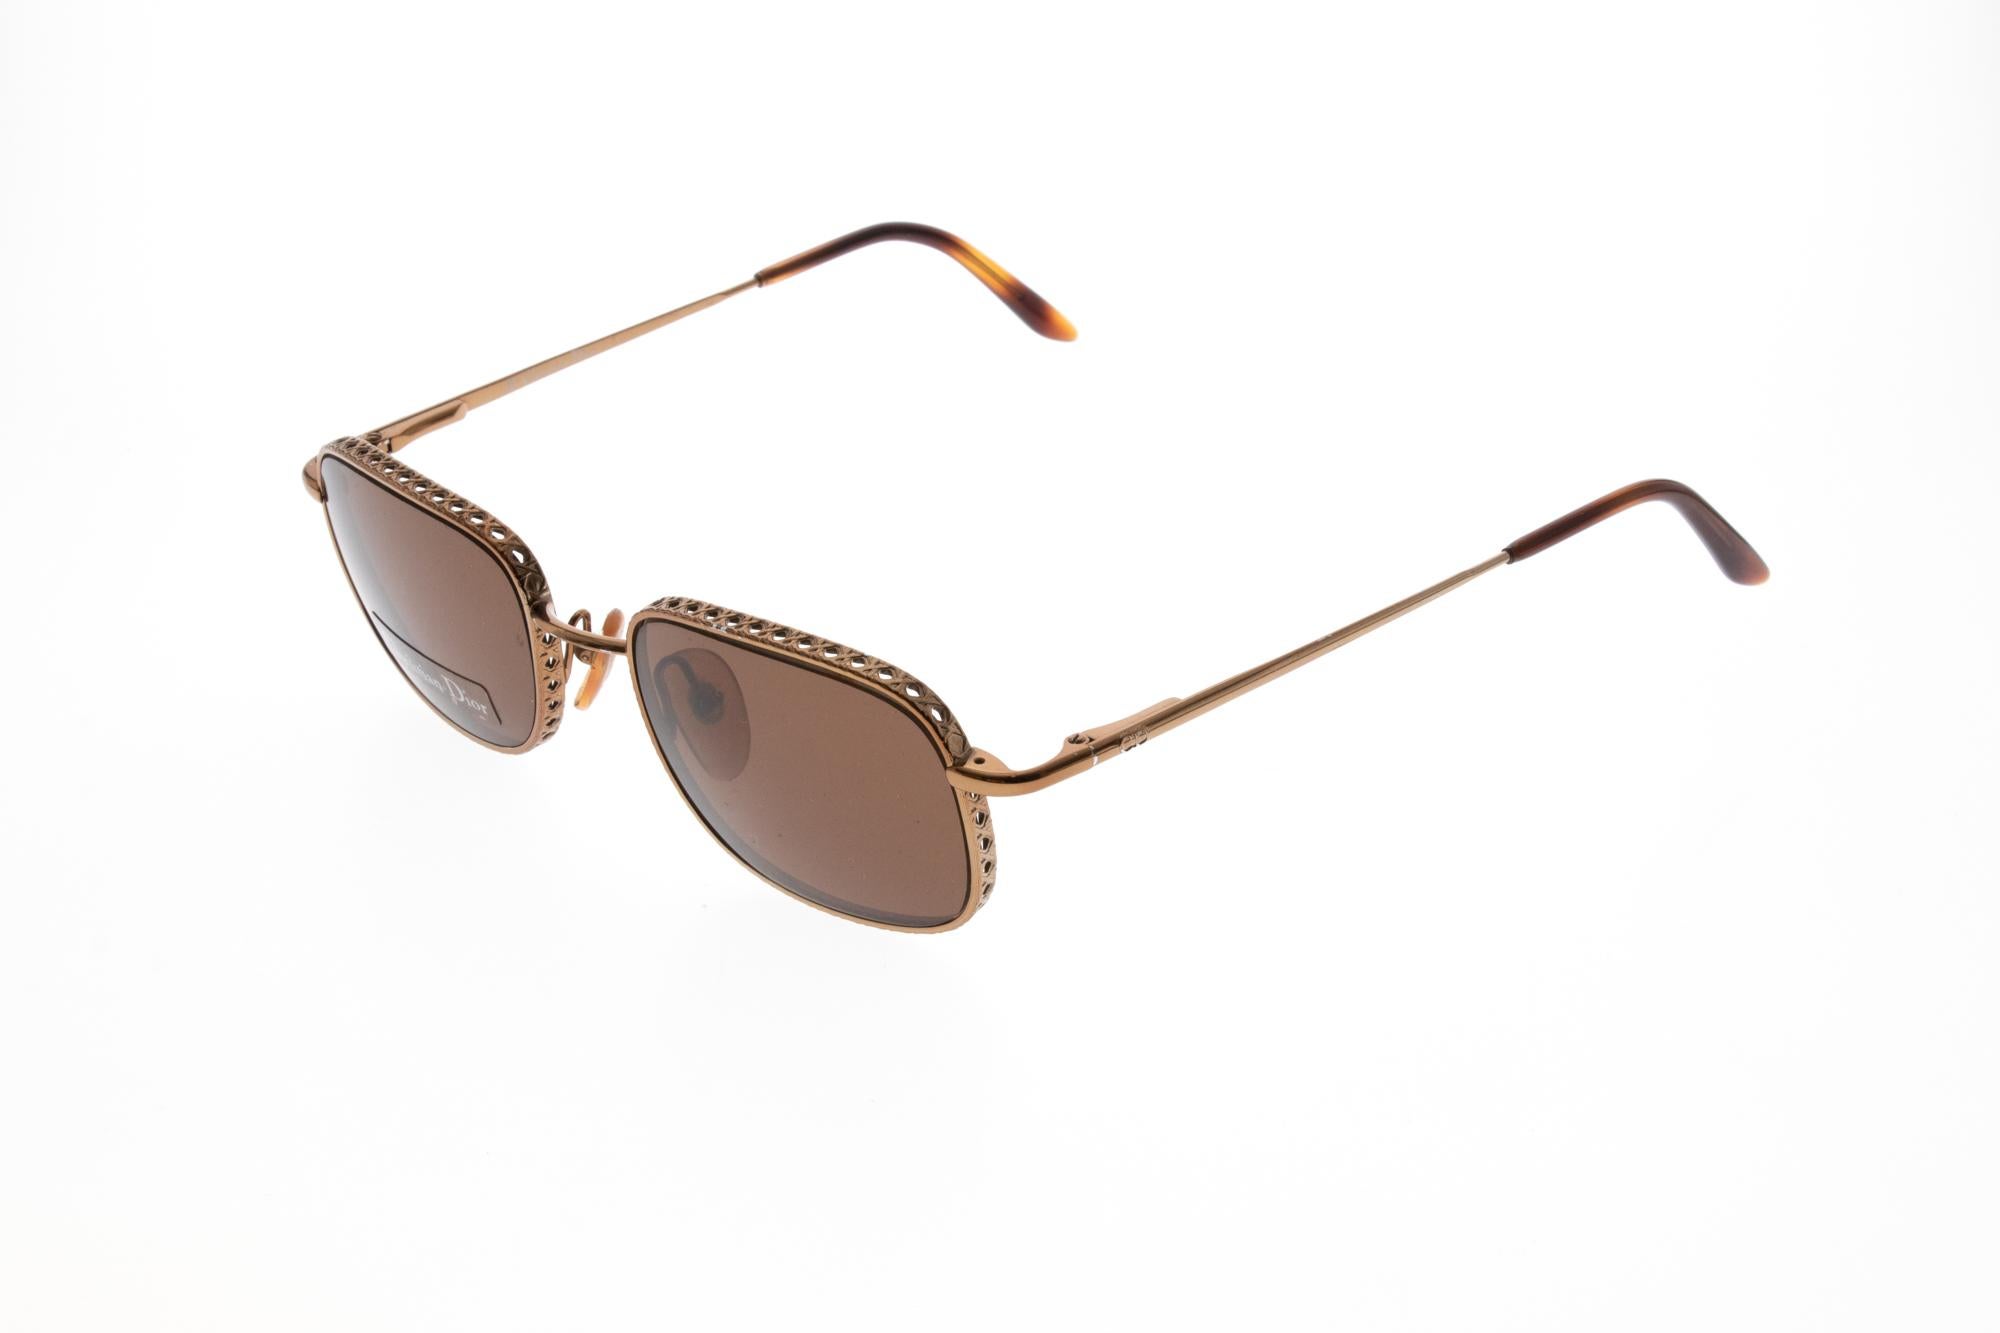 These bronze coloured sunglasses are made by Christian Dior. Vintage Christian Dior sunglasses and frames are one of the most stylish and desirable glasses in the world today. Being one of the world’s top fashion houses for decades, vintage